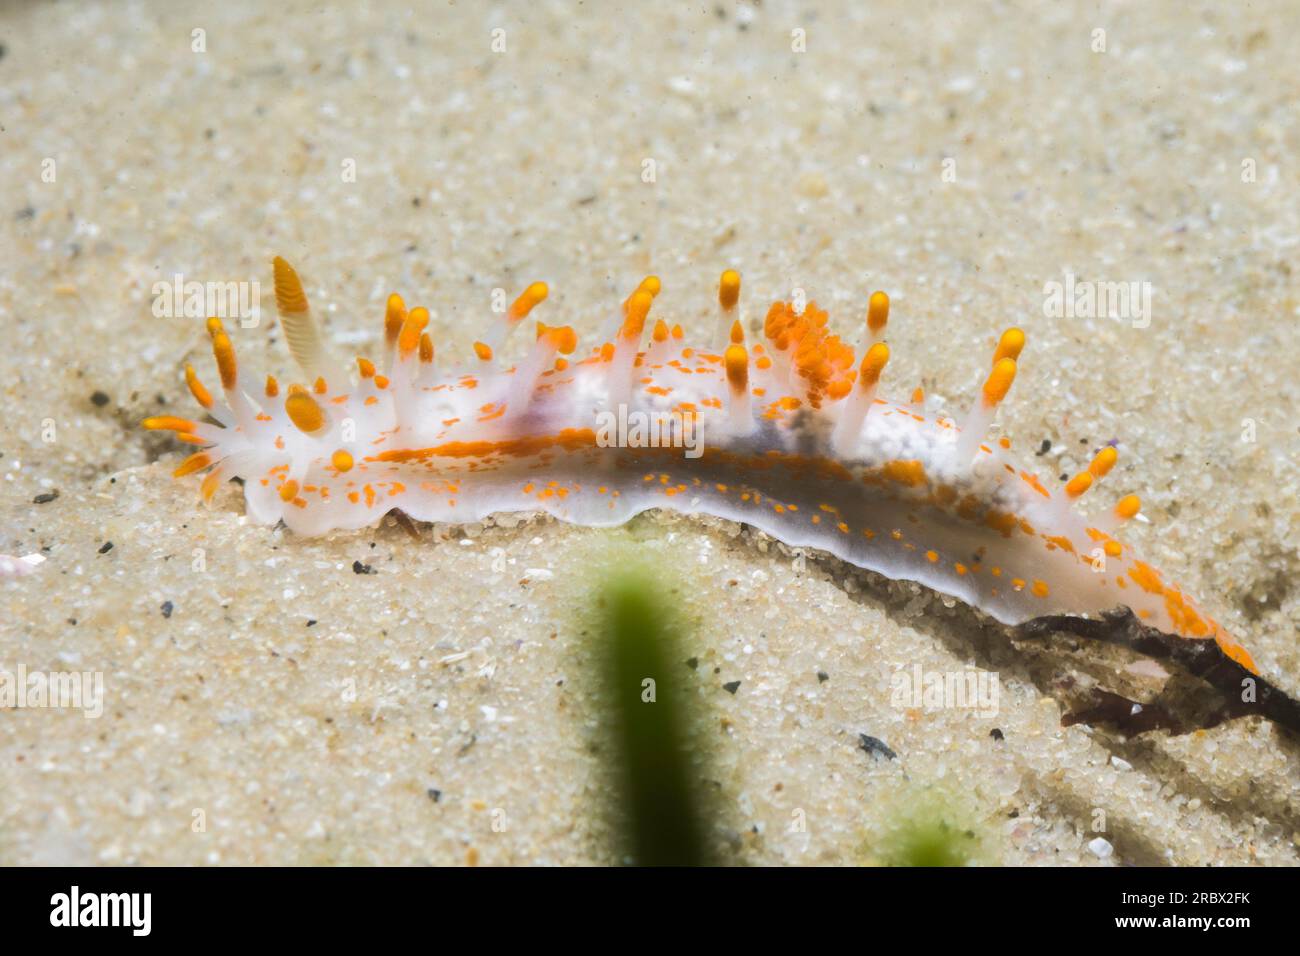 Orange-clubbed sea slug (Limacia clavigera) side view of a white bodied nudibranch with orange tips on protrusions and blotches Stock Photo